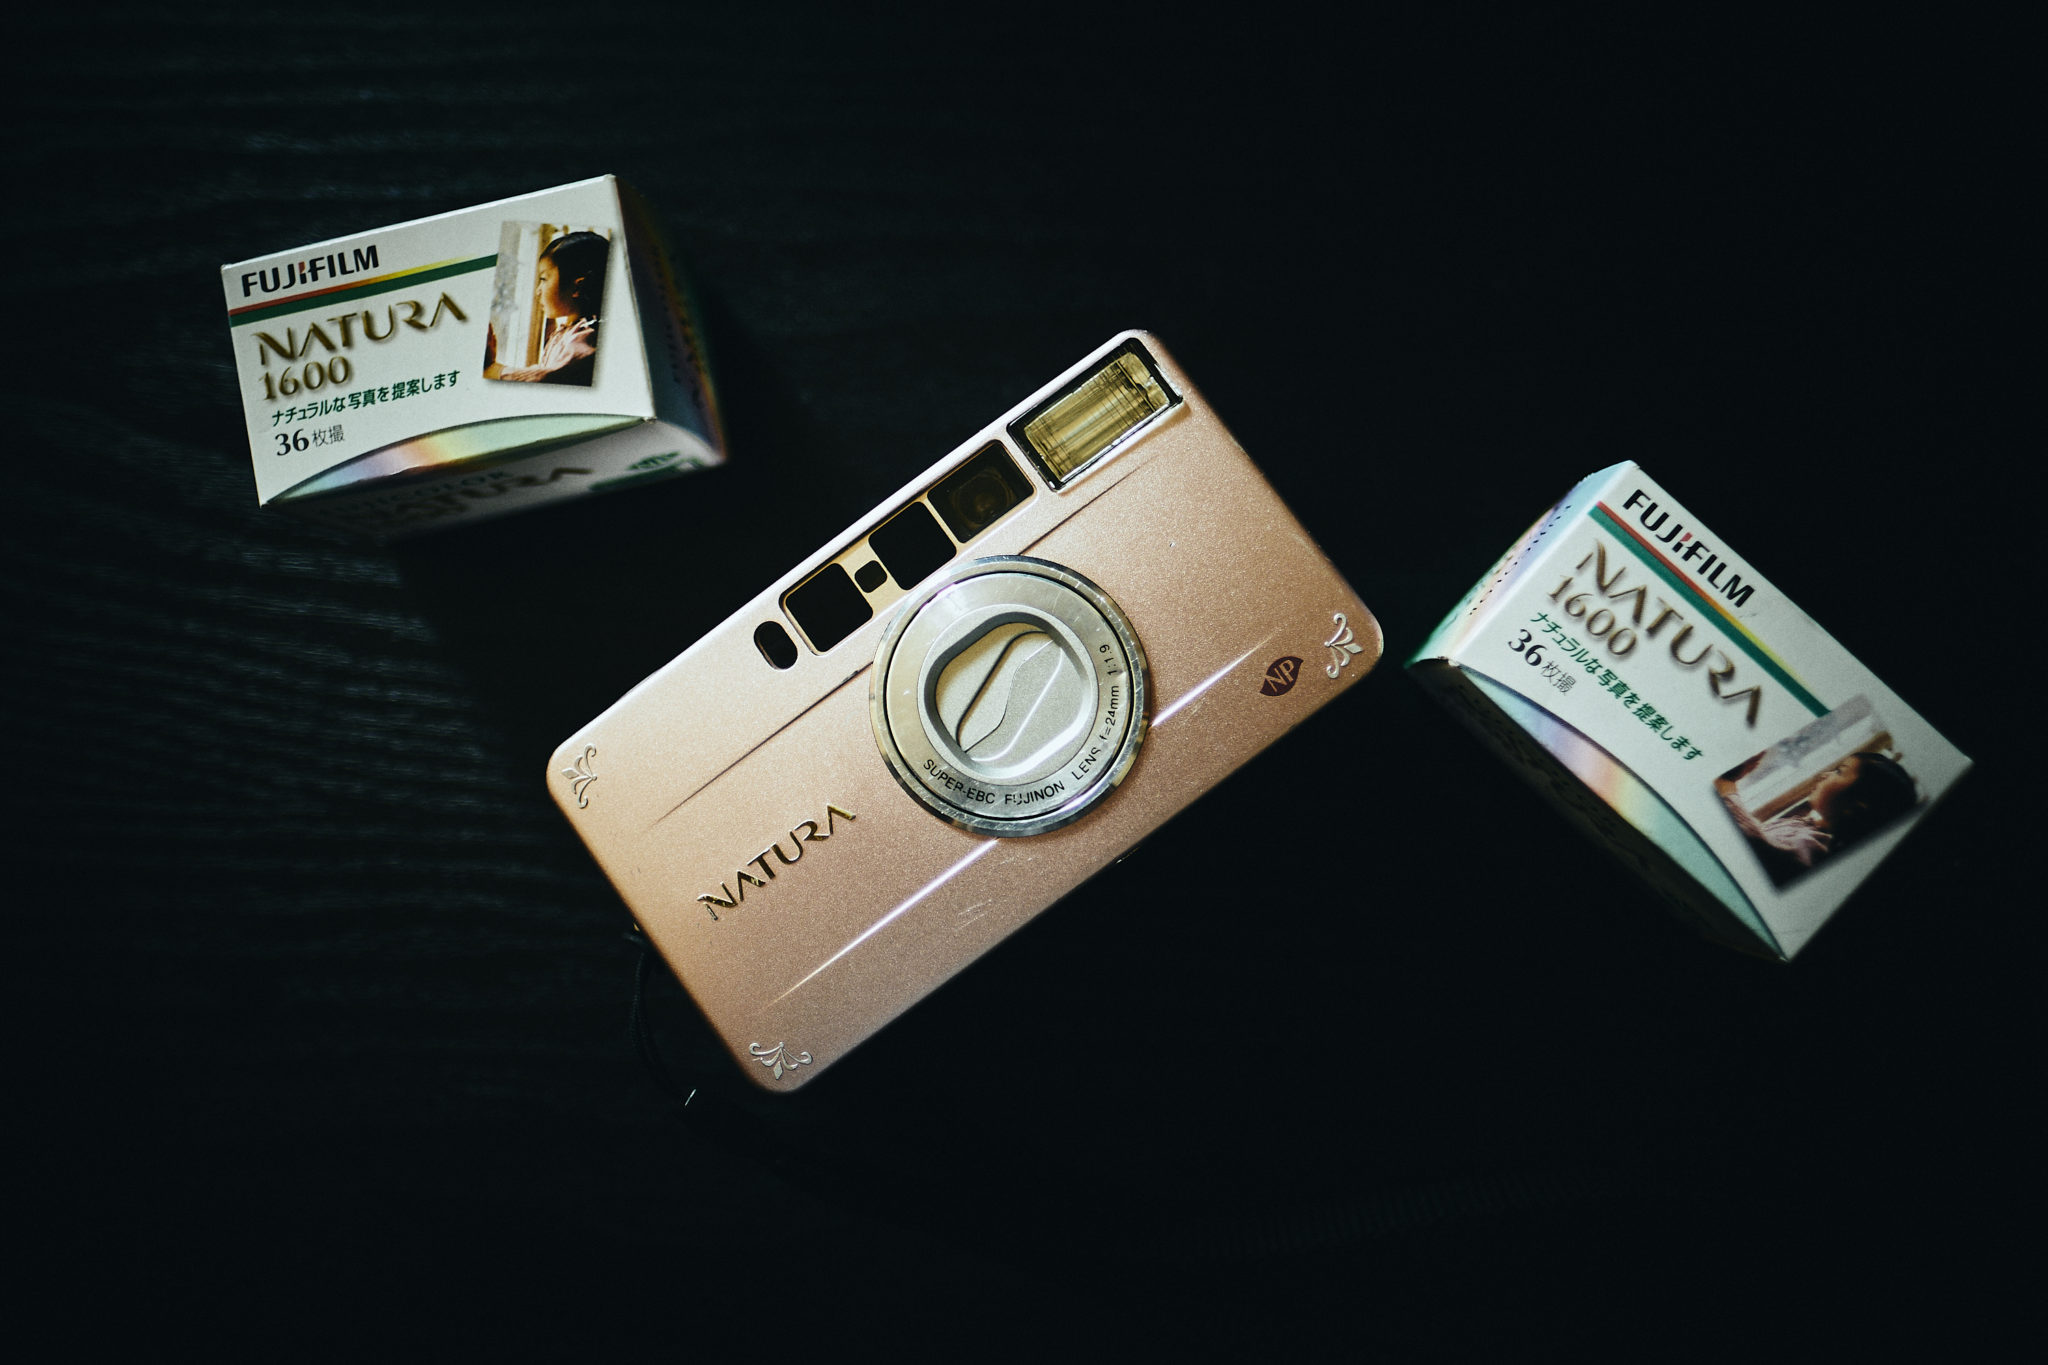 Chris Gampat The Phoblographer Fujifilm Natura S review product images 6